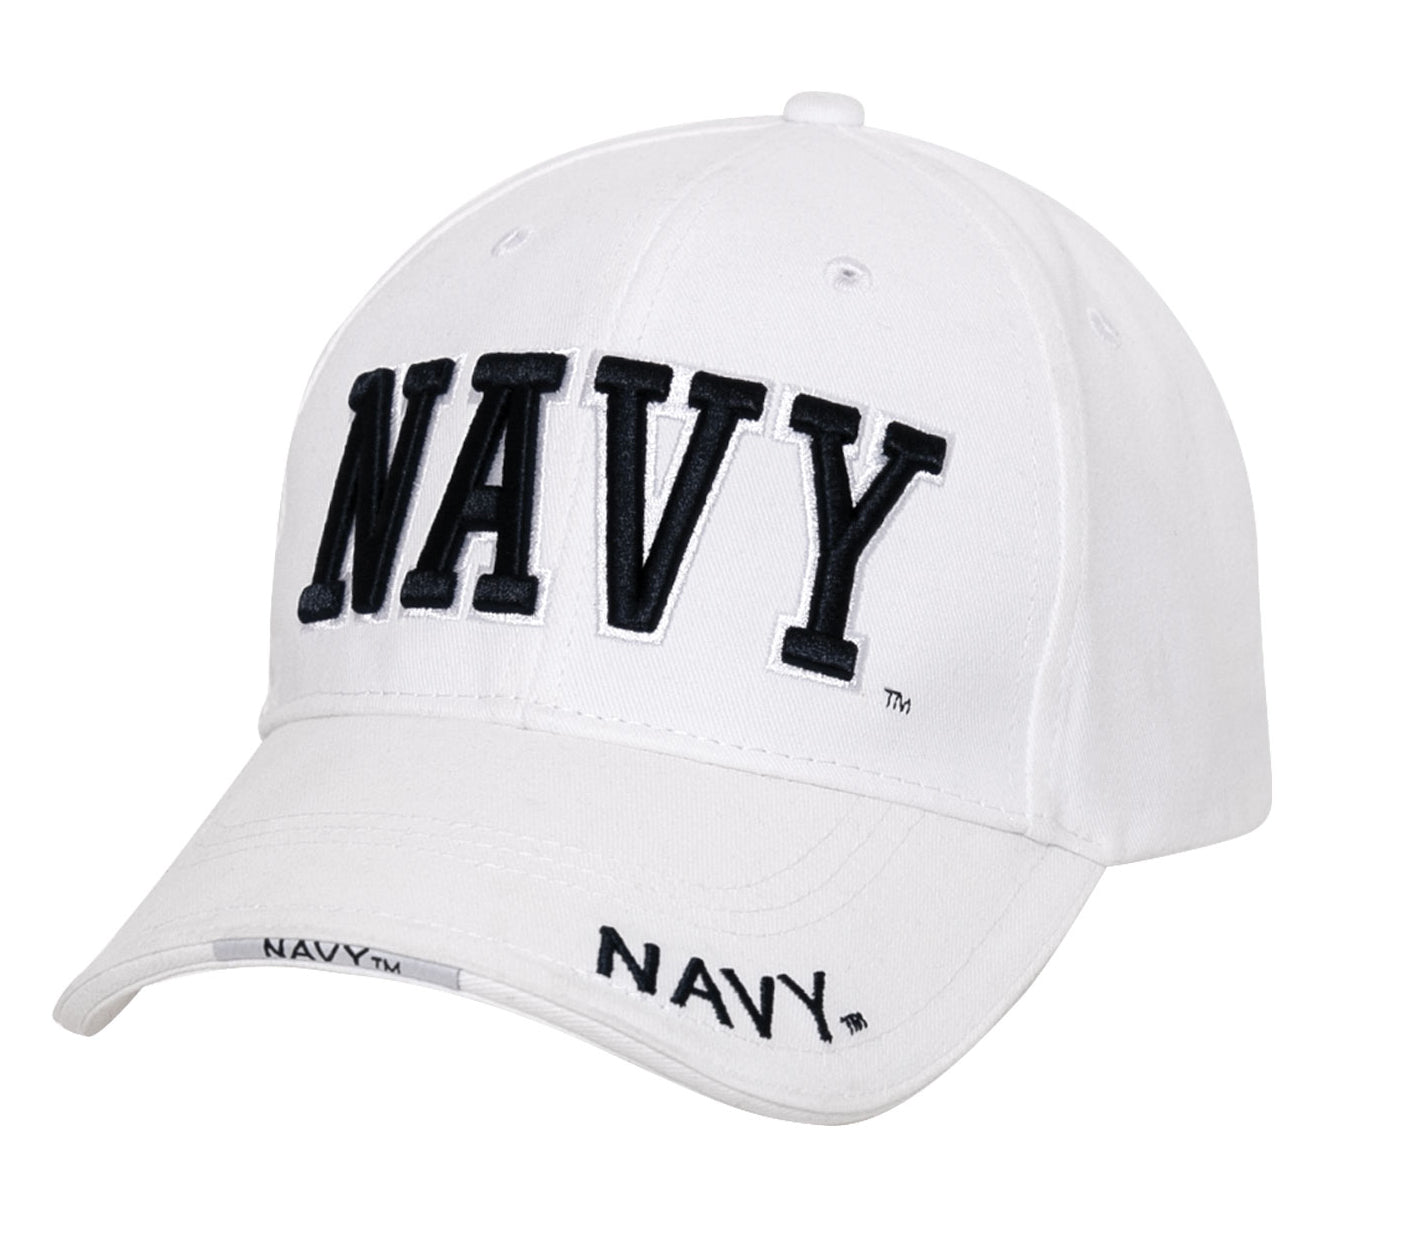 Rothco Deluxe US Navy Low Profile Cap USN